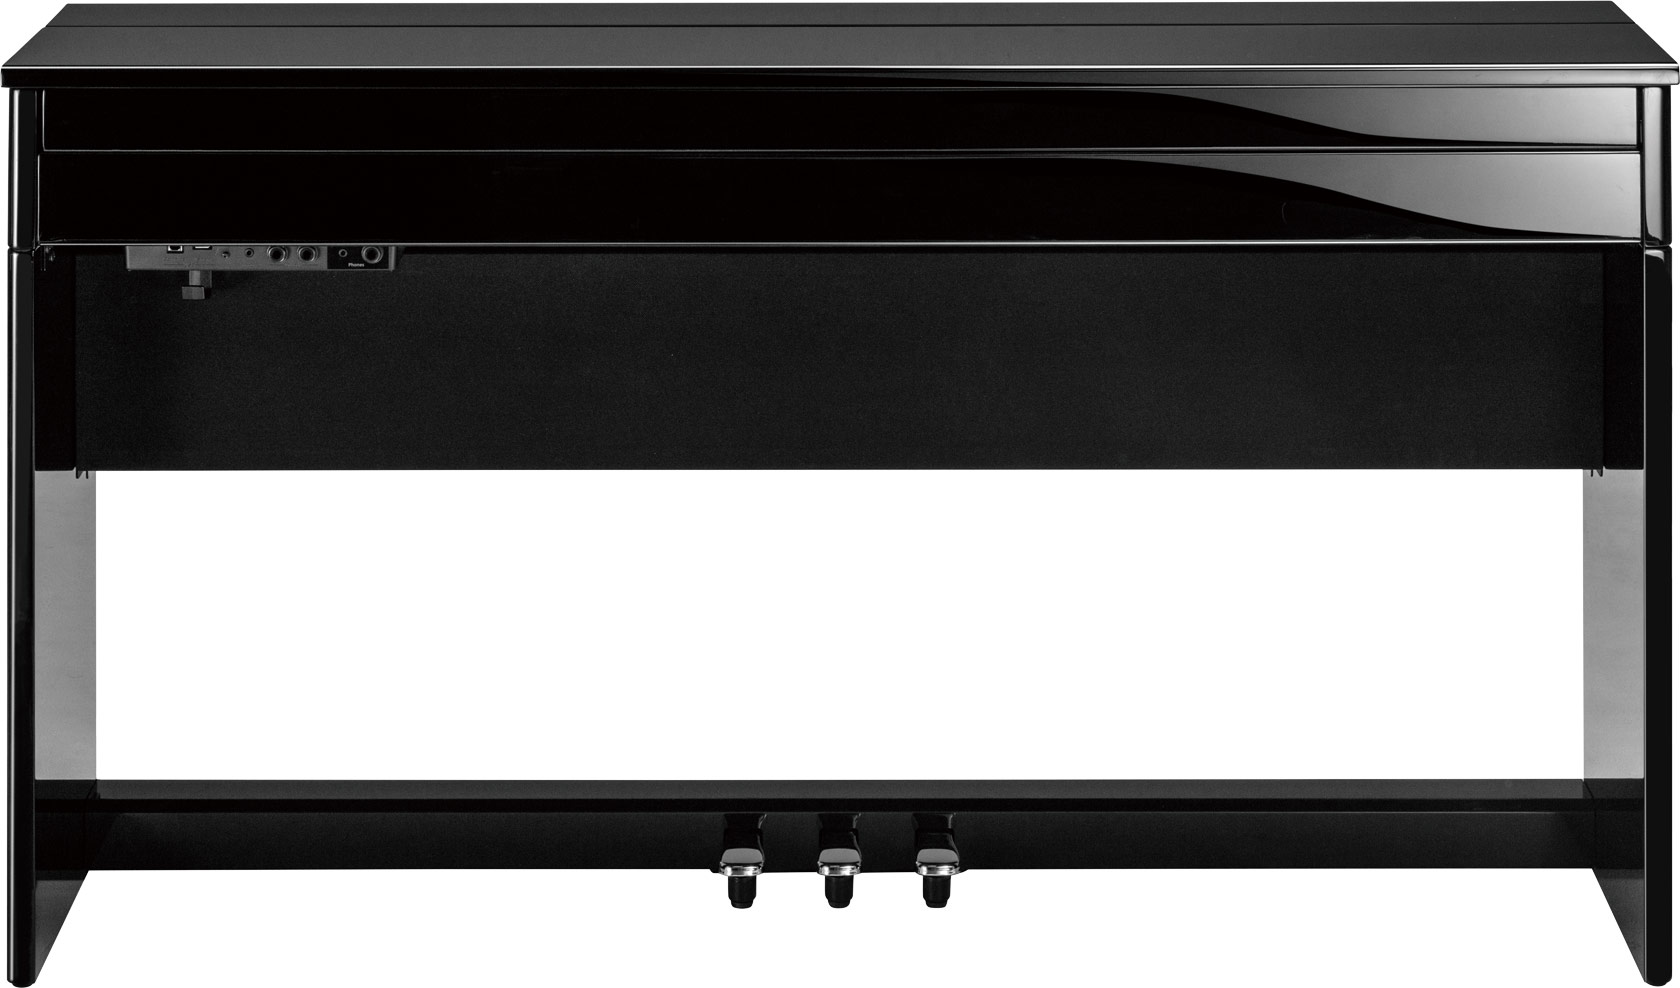 Roland Dp603 - Polished Ebony - Digital piano with stand - Variation 2